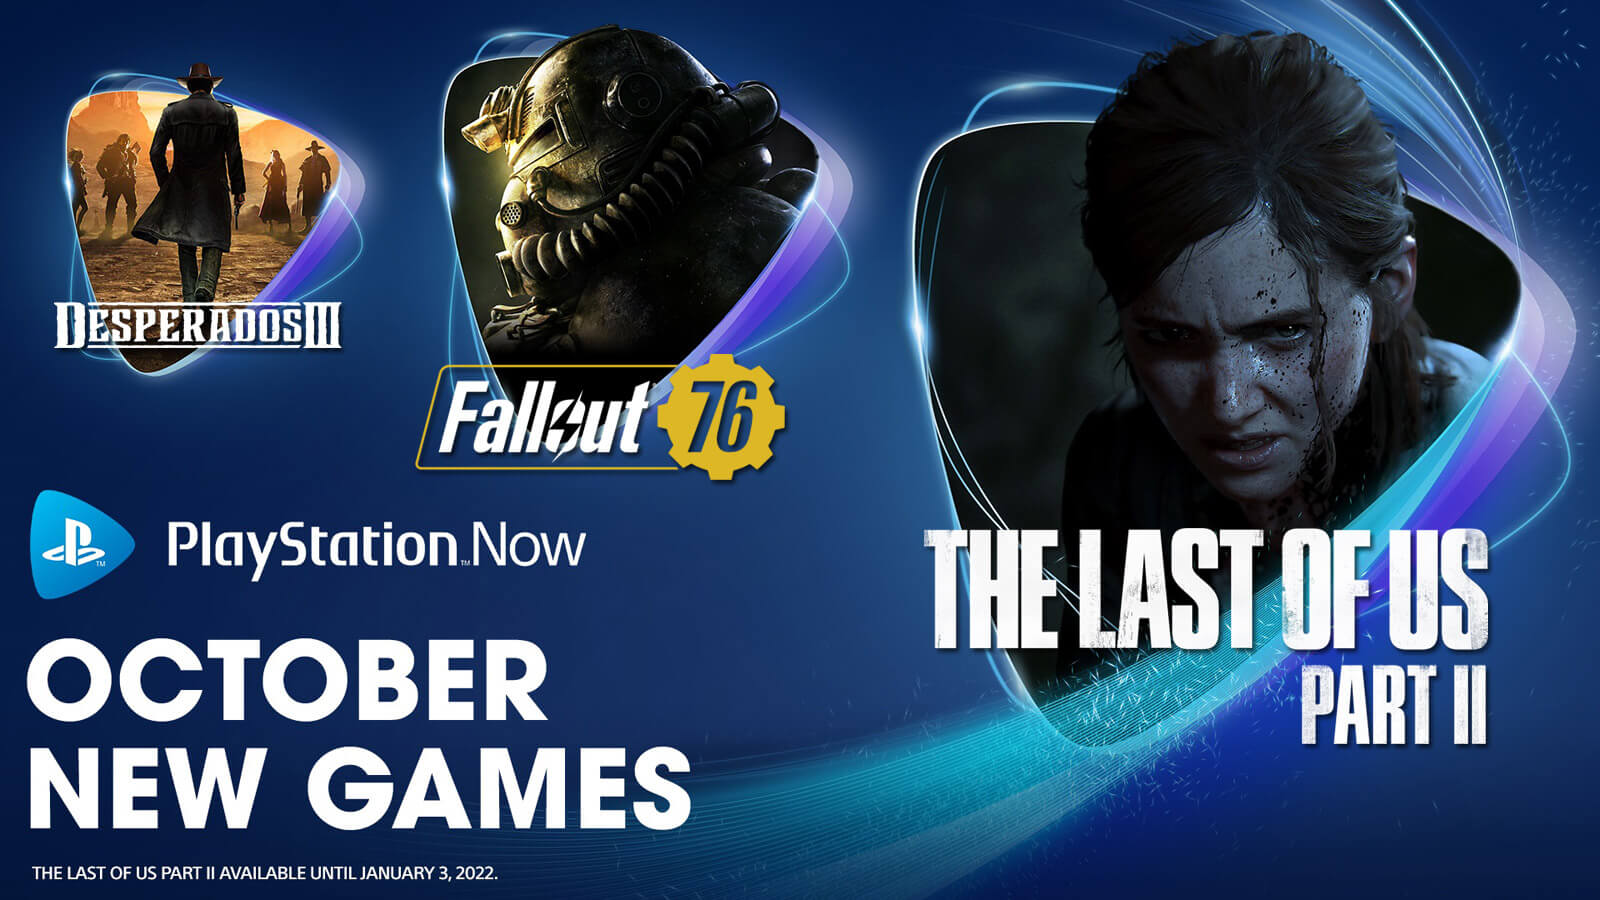 PlayStation Now games October 2021: The Last of Us Part II, Fallout 76,  Desperados III – PlayStation.Blog